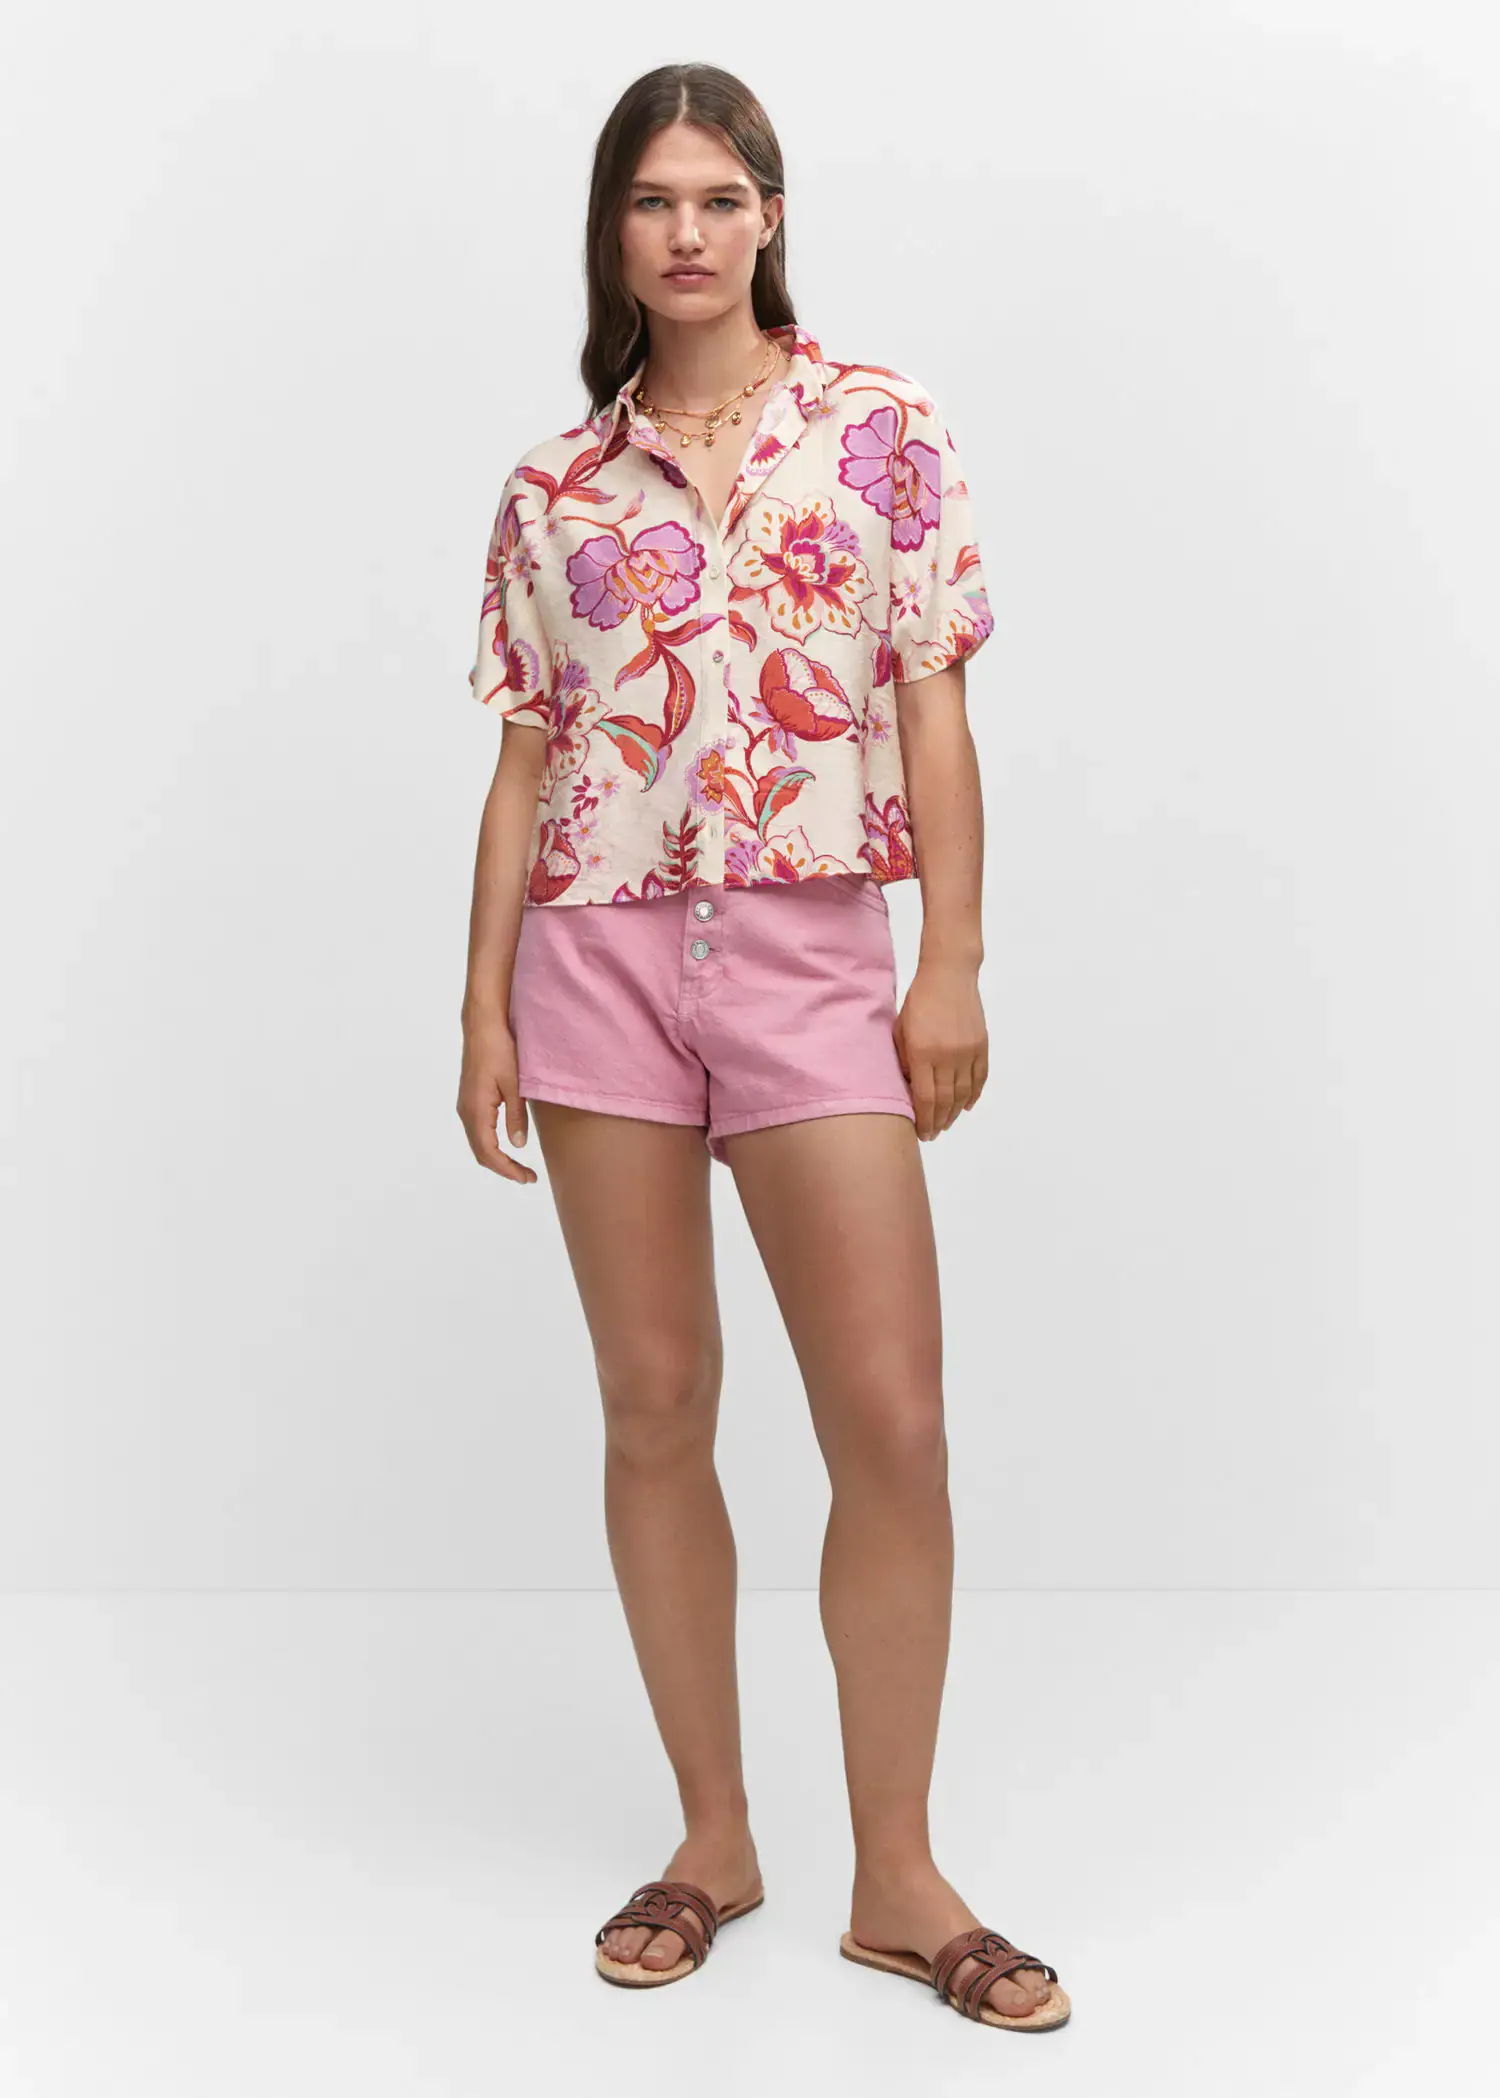 Mango Buttoned printed shirt. a woman wearing pink shorts and a floral shirt. 